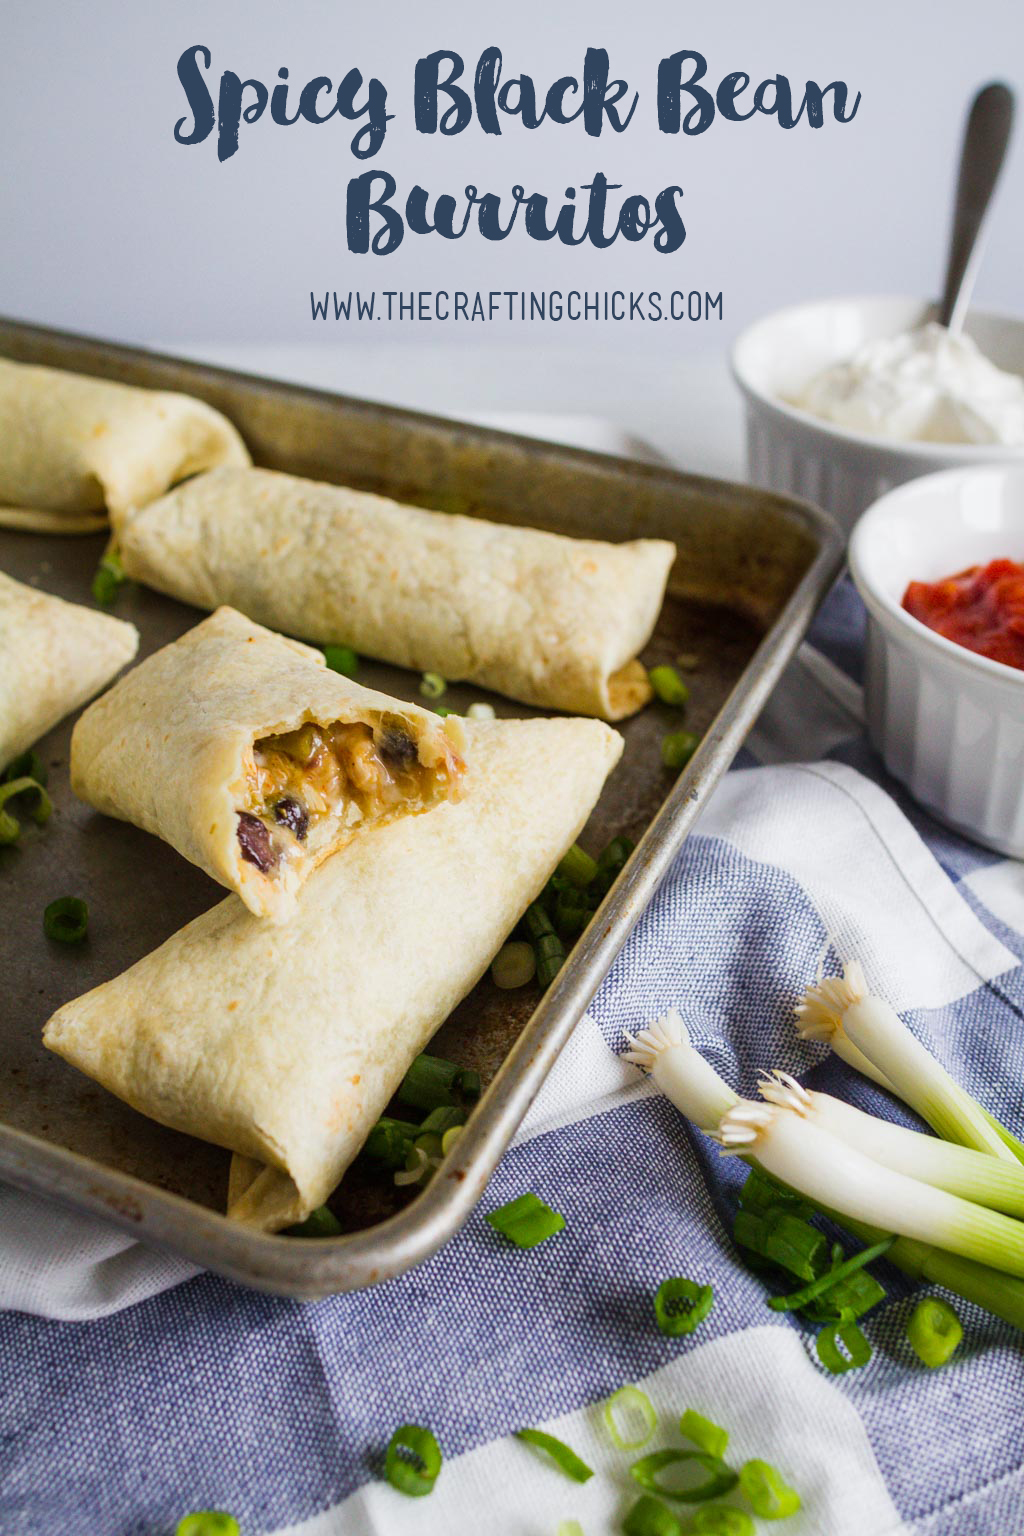 Spicy Black Bean Burritos - one of our favorite family recipes!  Perfect for lunch on the go or a quick dinner.  Don't forget to make extra to freeze!